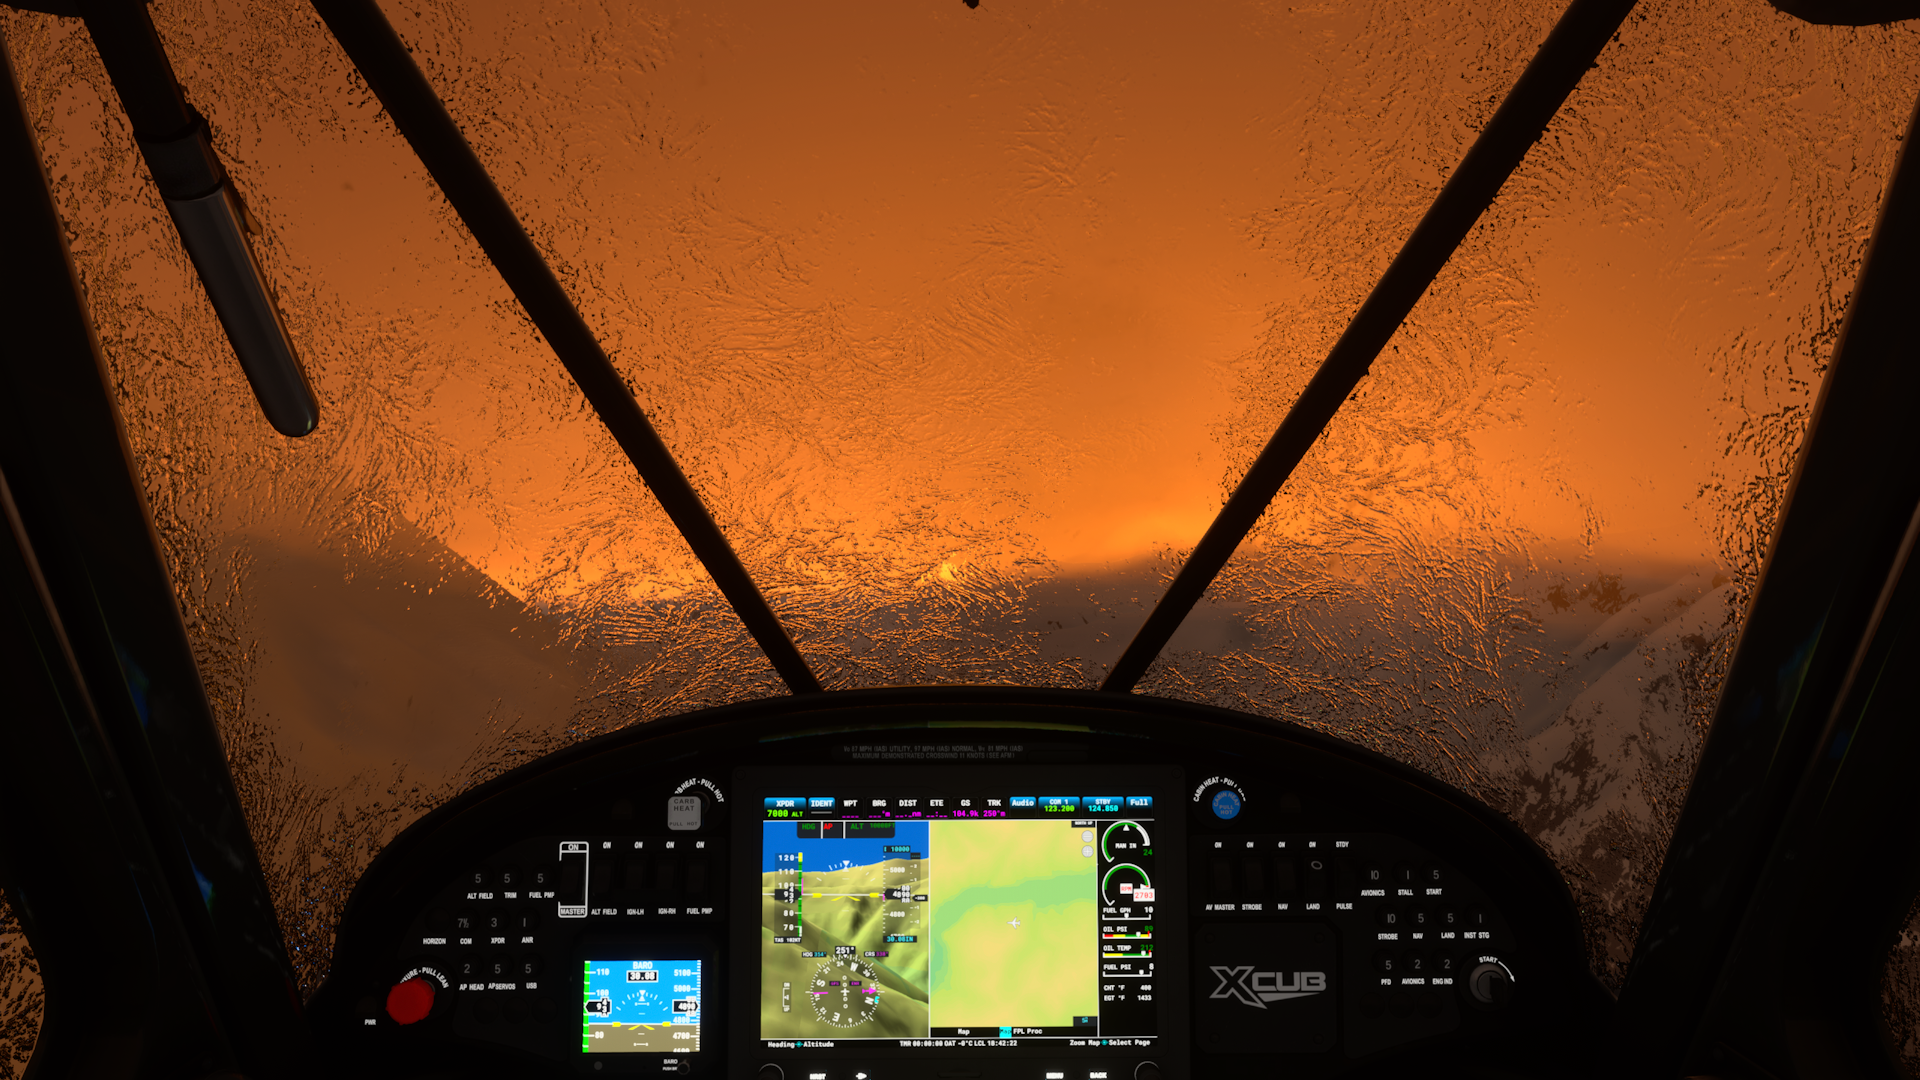 Frozen windshield over the Rockies in Bristish Columbia as the sun is setting on the horizon | Microsoft Flight Simulator